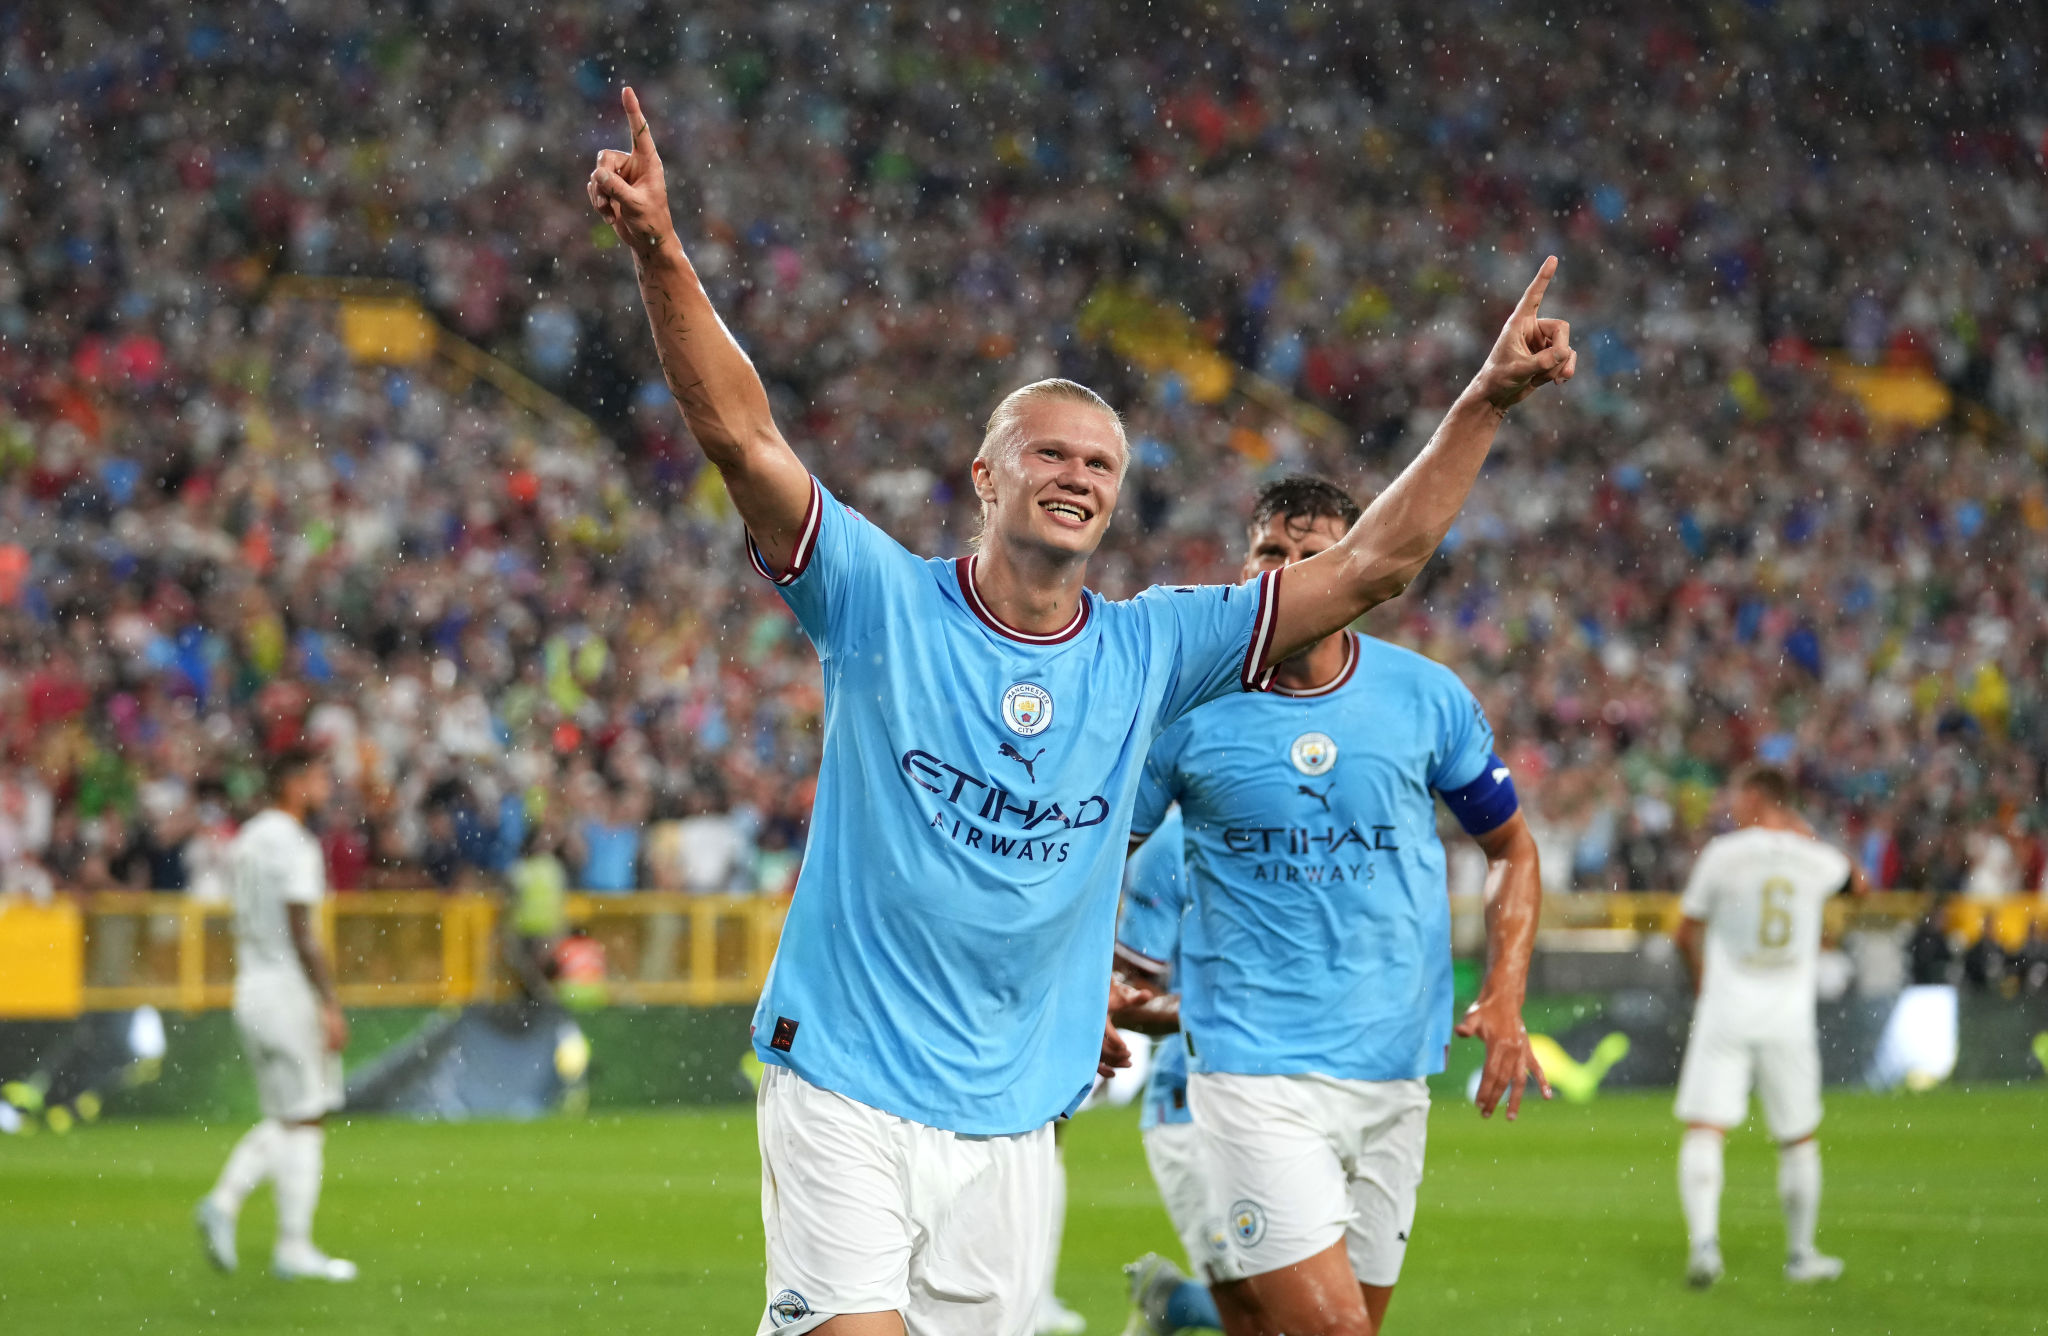 Manchester City Season 2022: Man City earnings, sponsors, full schedule, Manchester City squad for Premier League 2022-23: